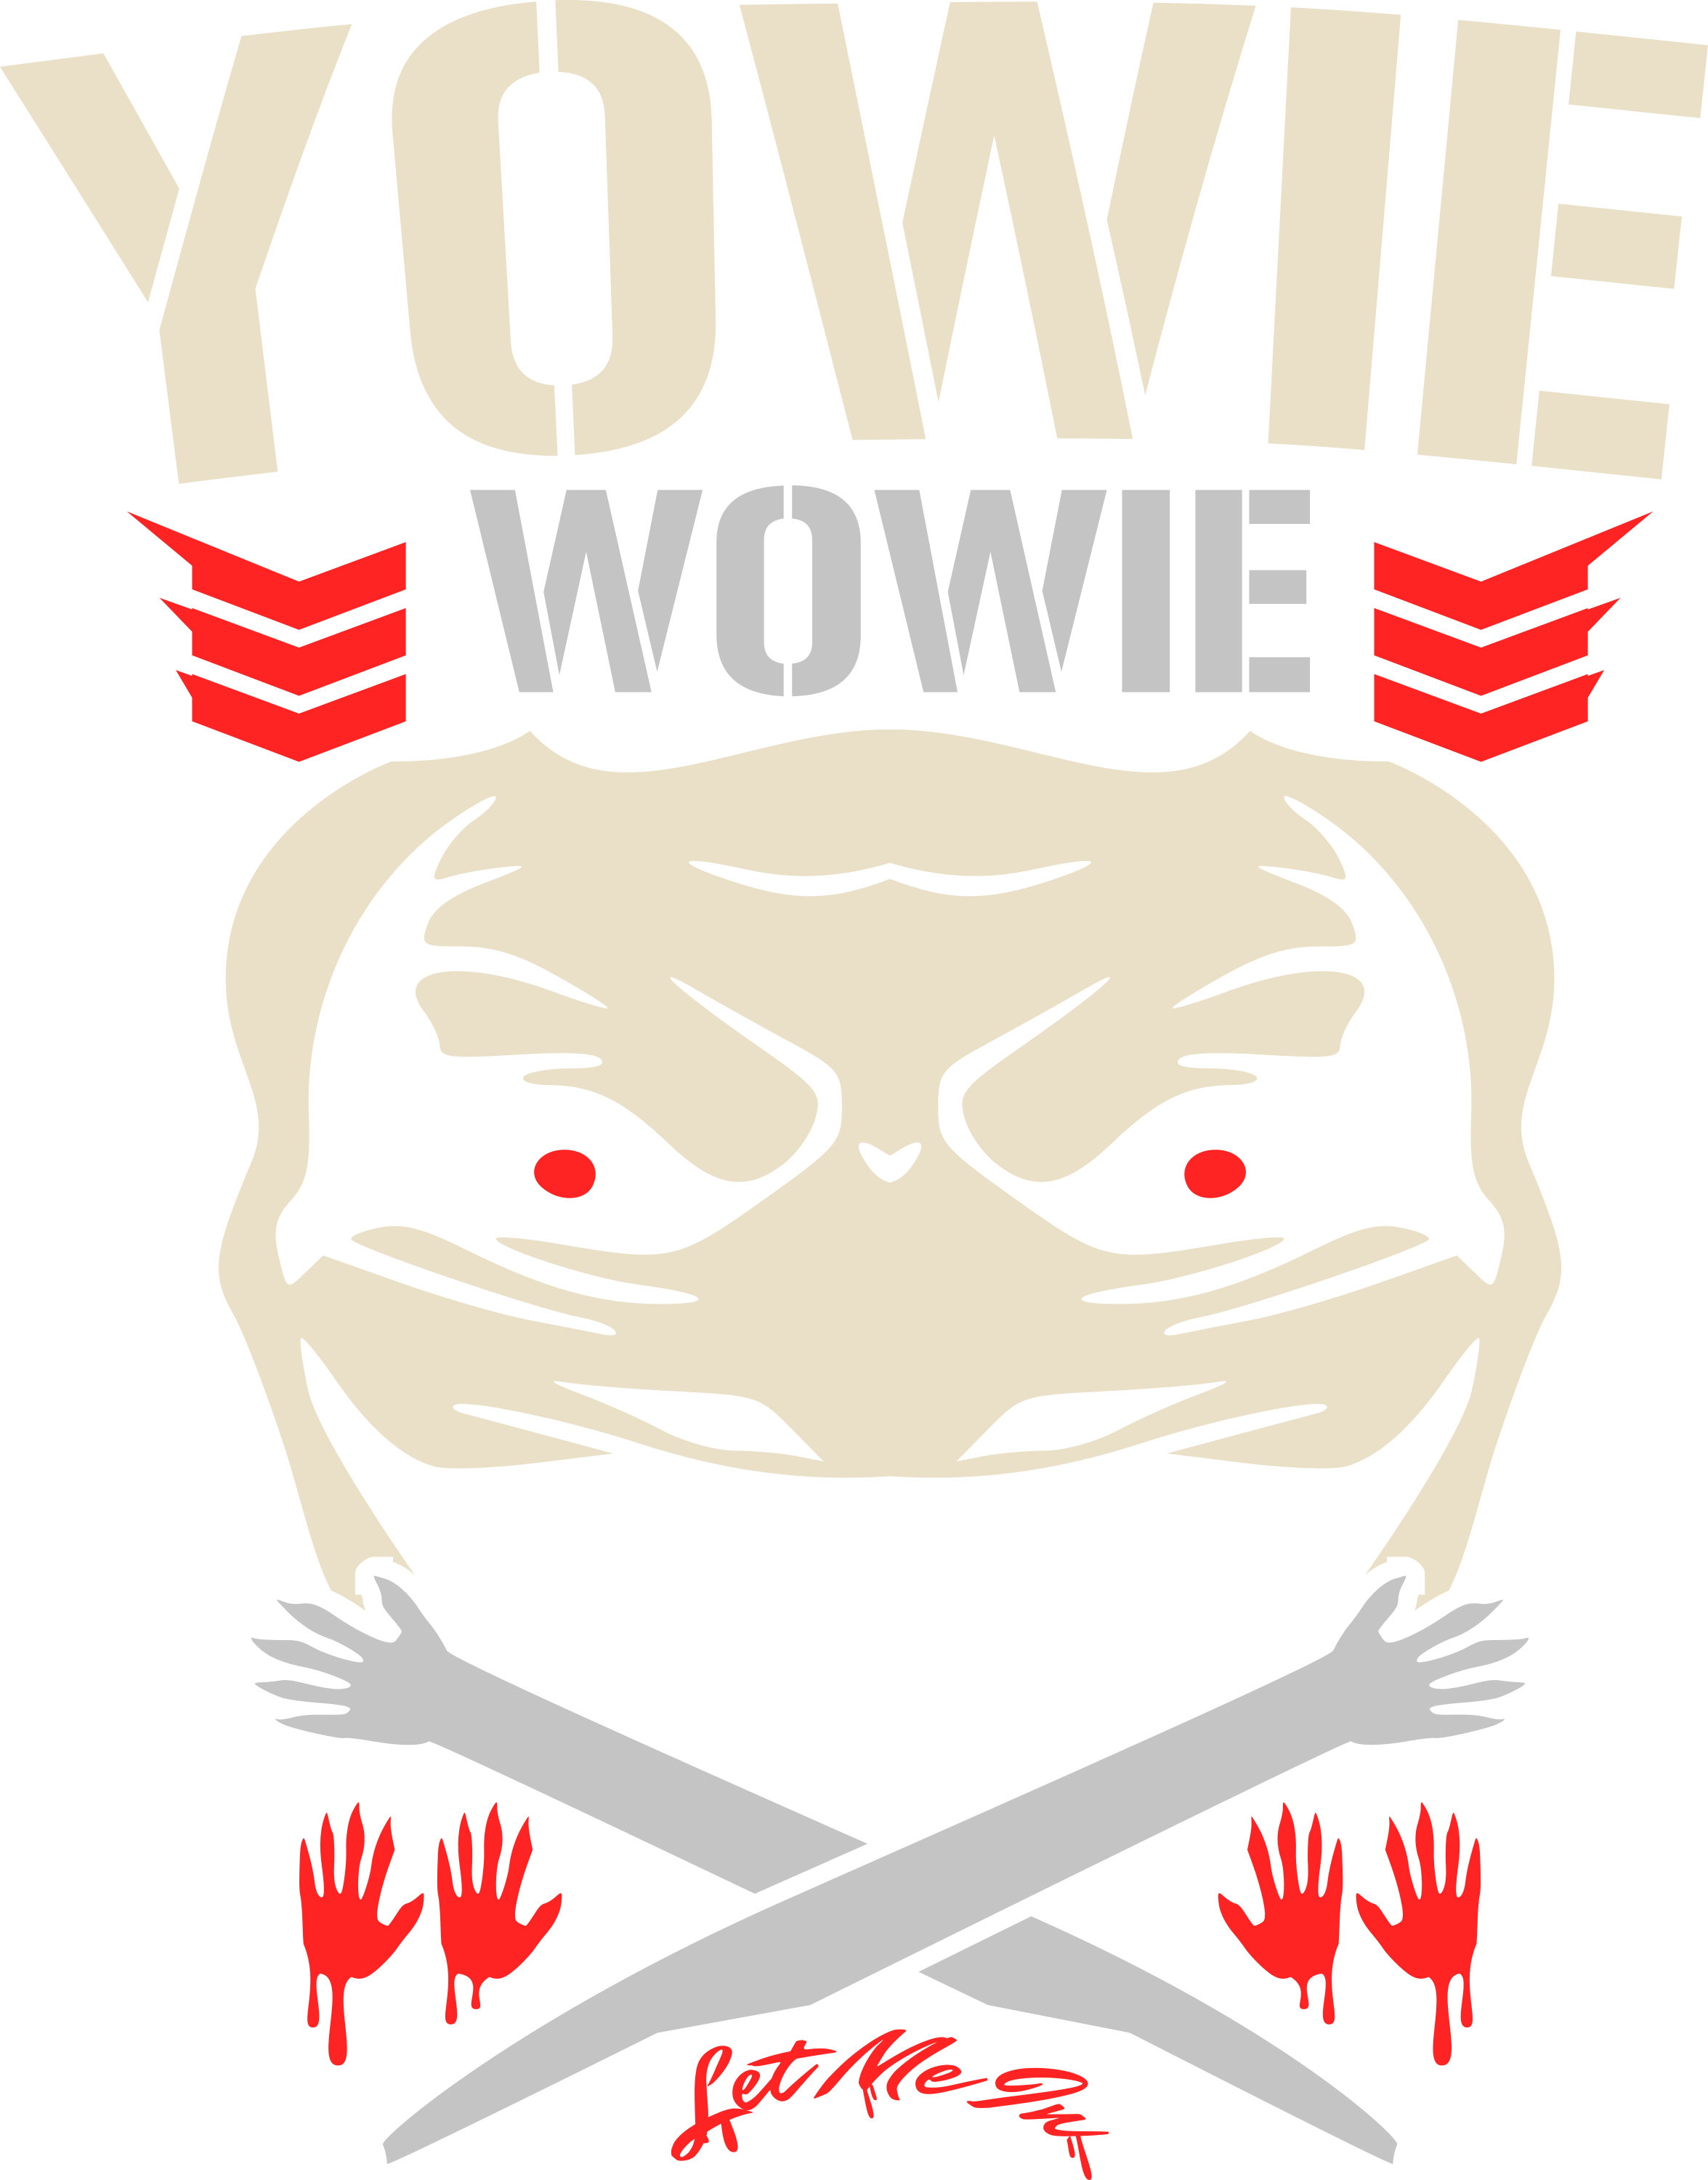 Yowie Wowie (Bullet Club Colored) Logo by DarkVoidPictures on DeviantArt